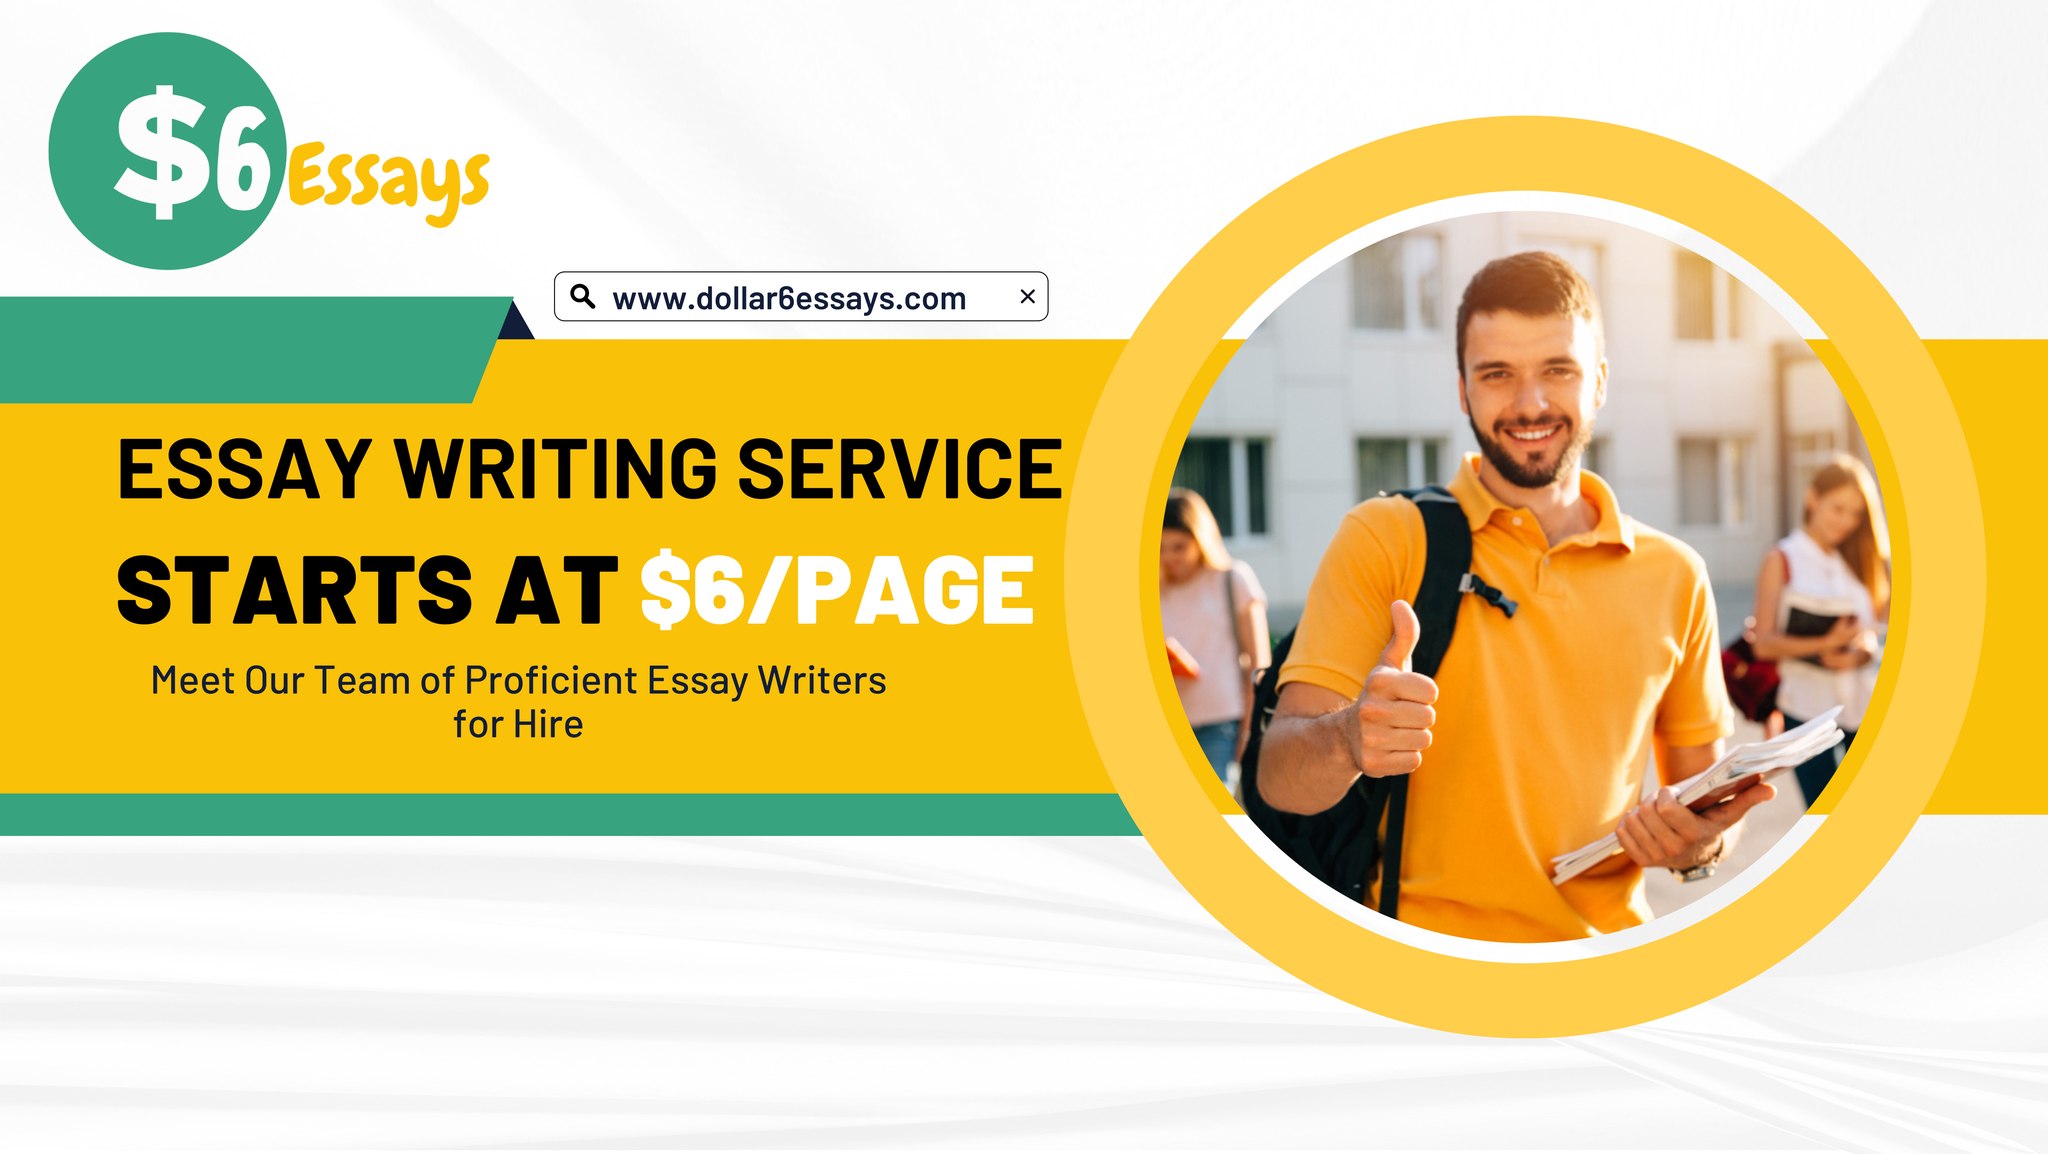 Get Top-Notch Essays At An Affordable Price With Dollar 6 Essays - Your Solution To Essay Writing